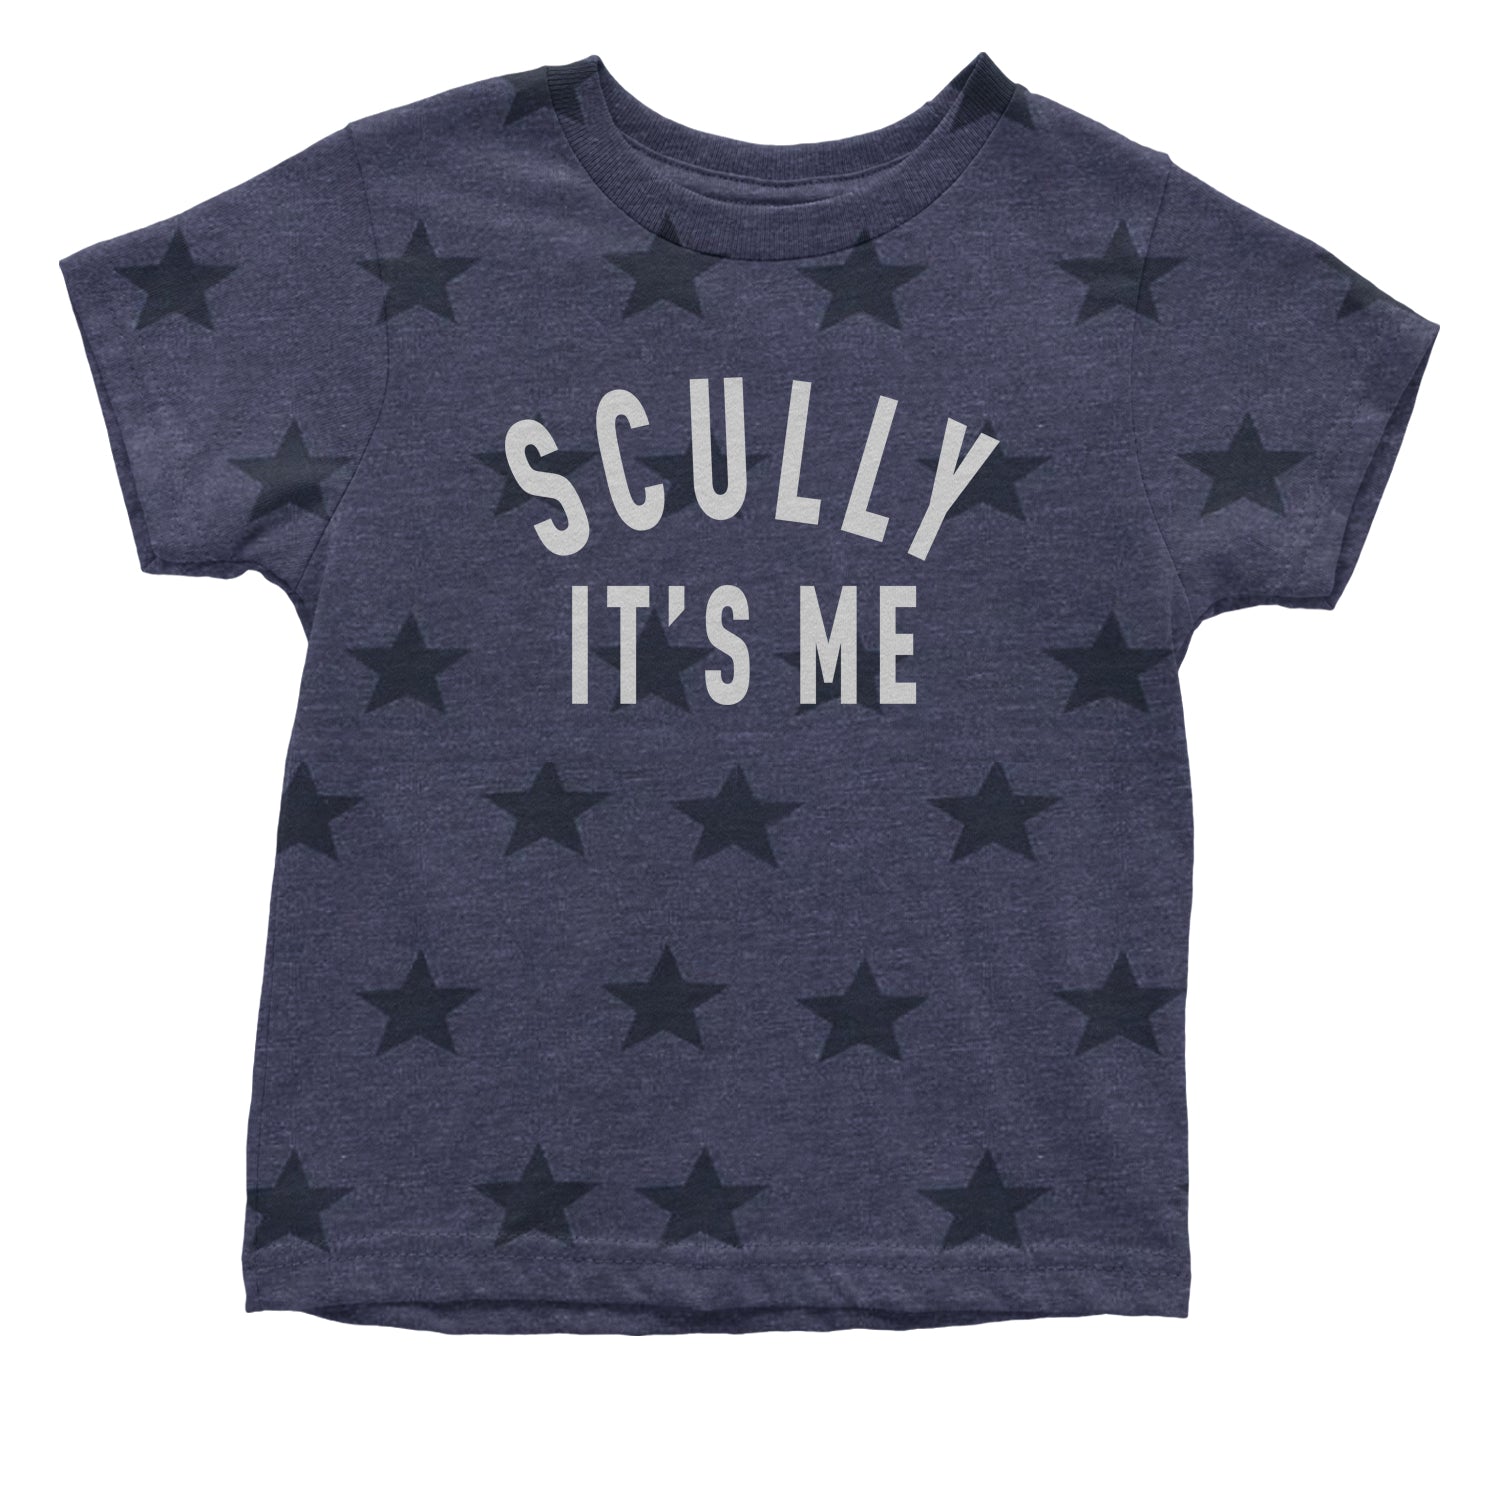 Scully, It's Me Infant One-Piece Romper Bodysuit and Toddler T-shirt #expressiontees by Expression Tees